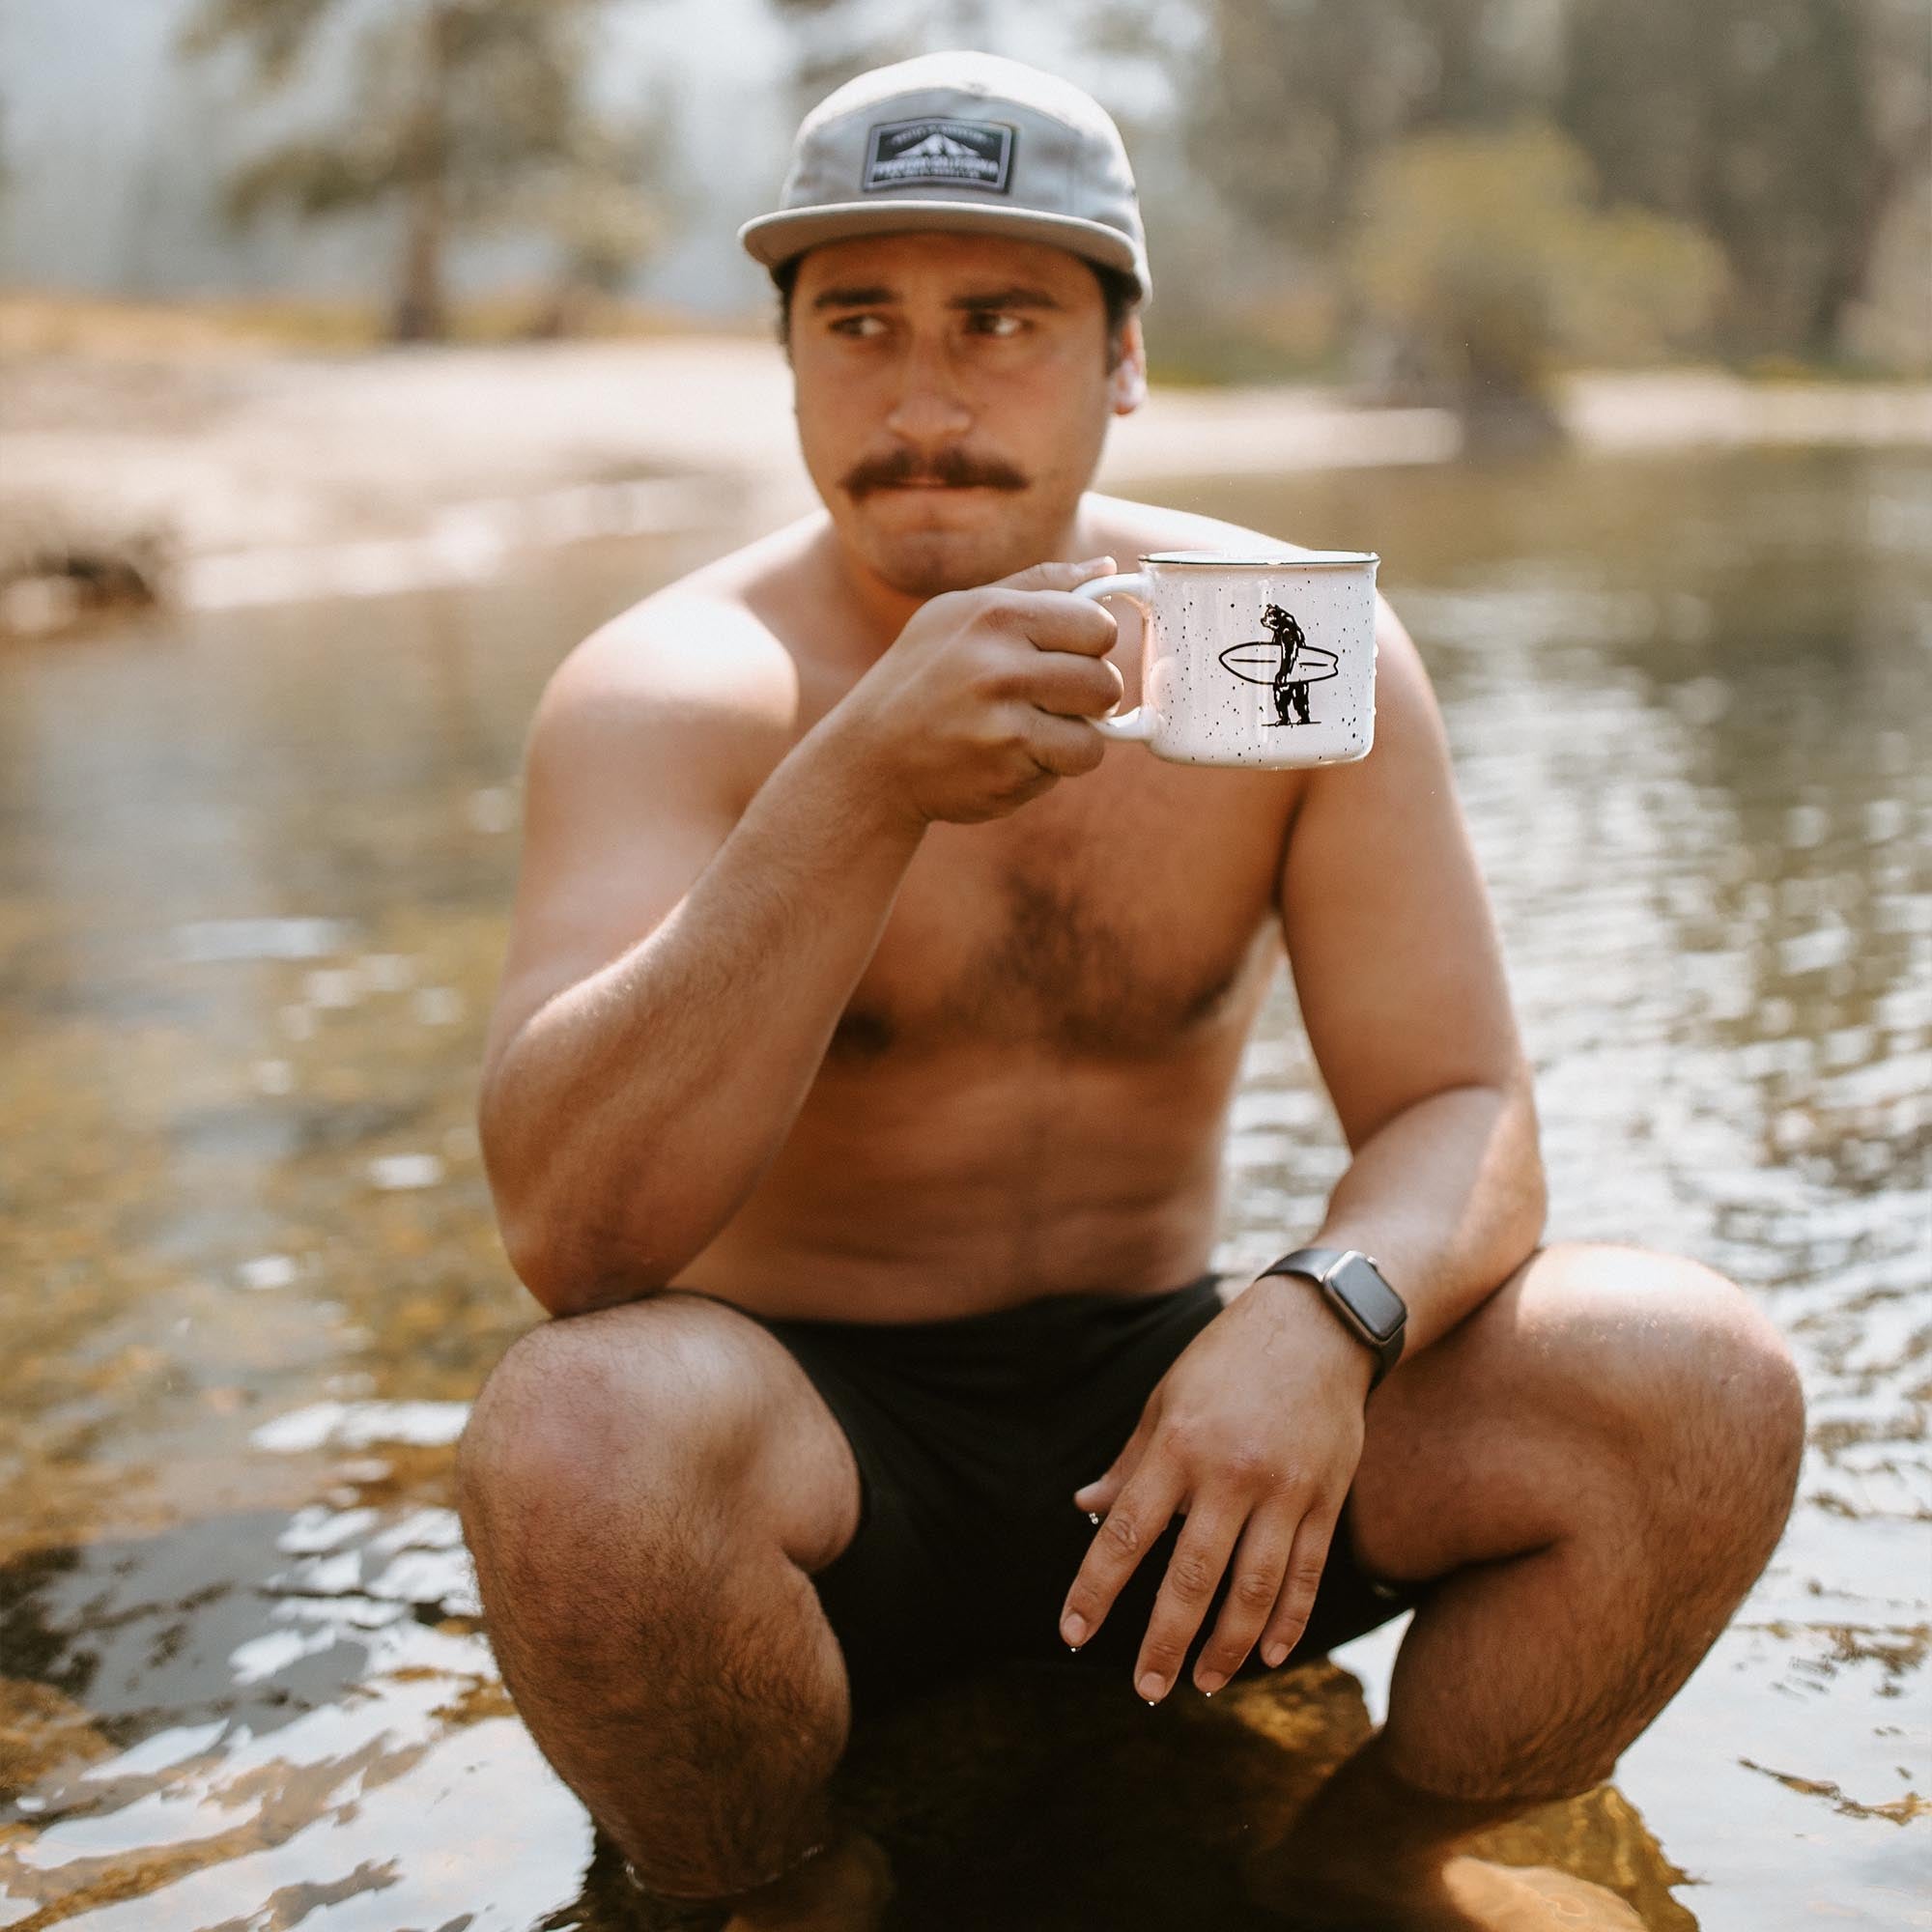 Everyday California Campfire Mug -  High-quality ceramic, speckled off-white mug with Everyday California Camping Logo on one side and Brutus the Bear on the other side. 